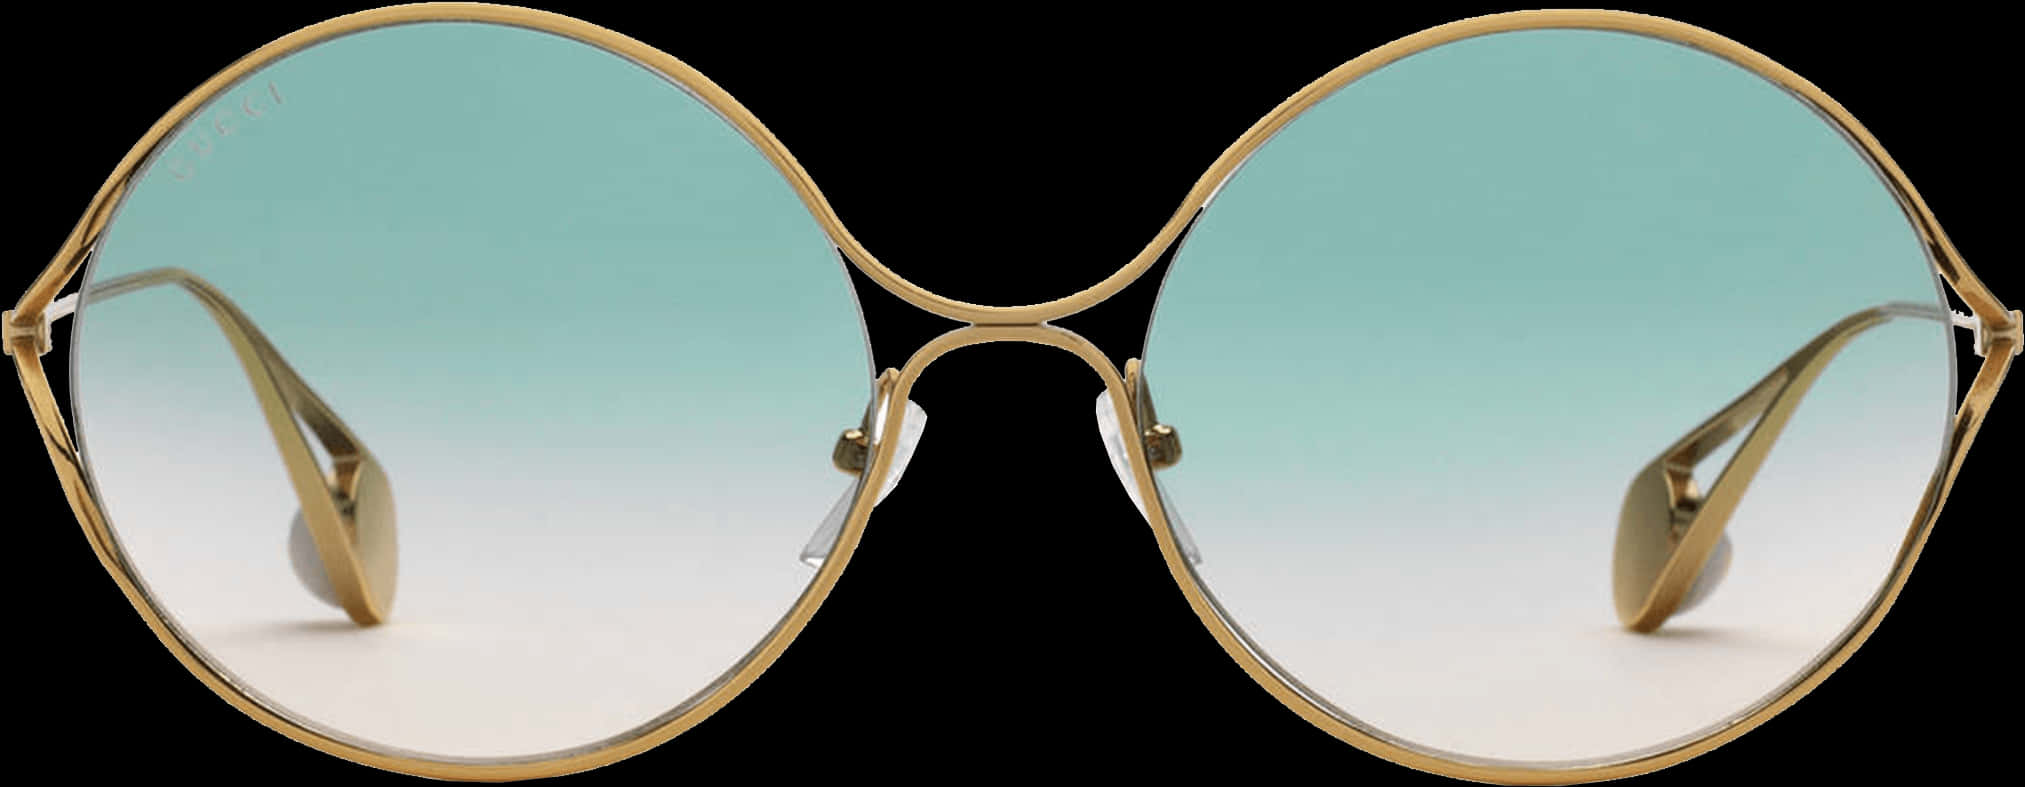 Gold Rimmed Round Glasses PNG